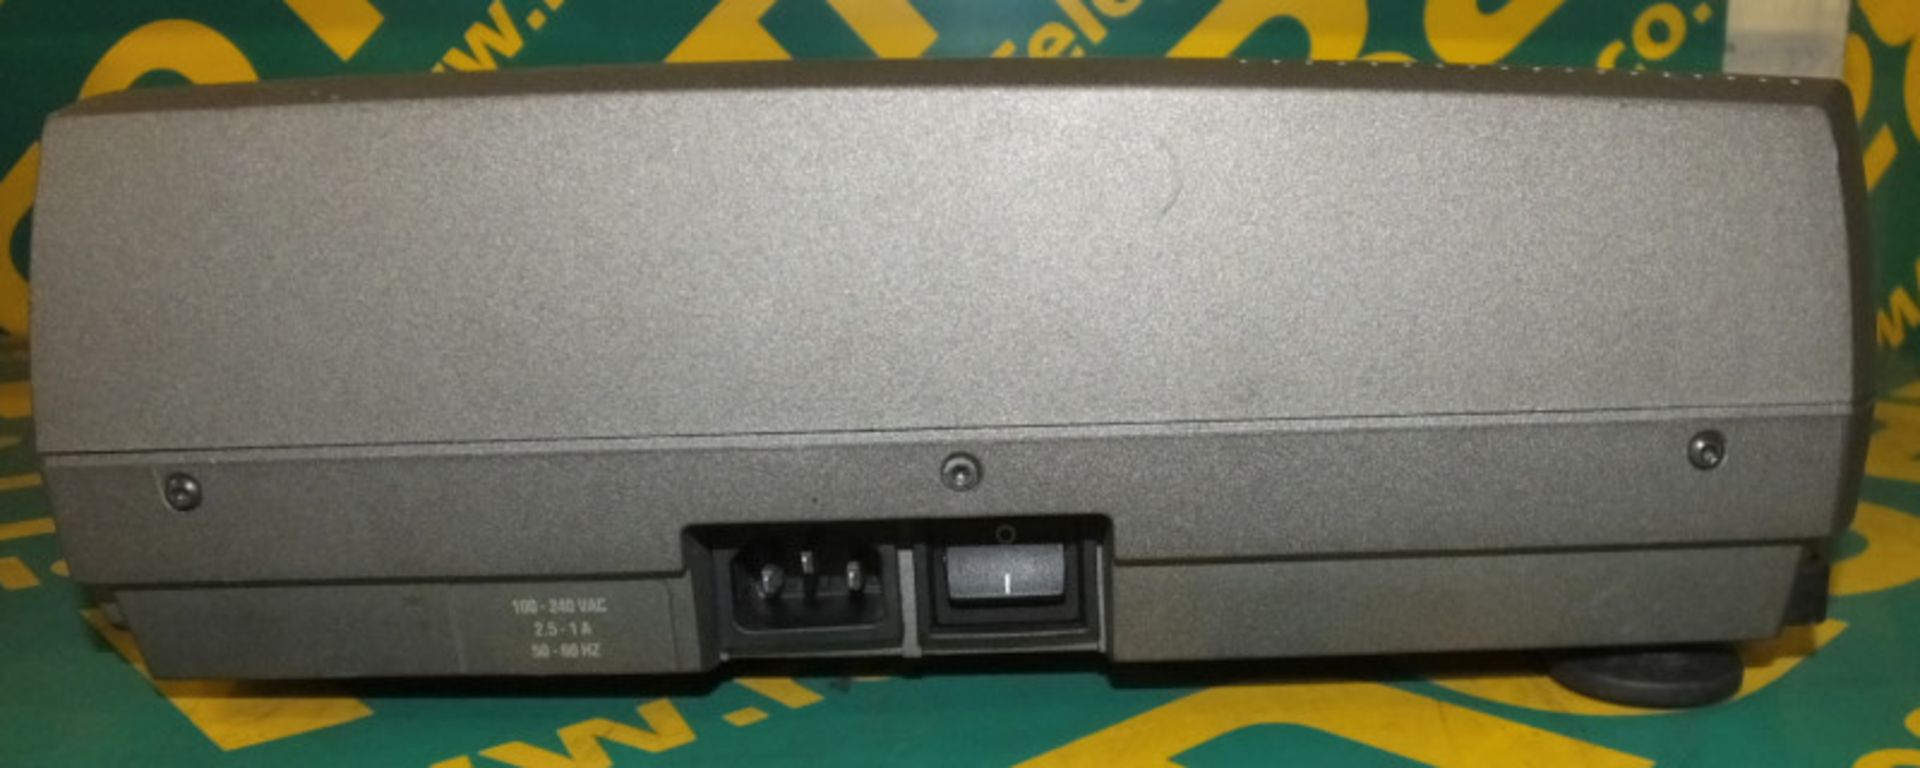 ASK C90 DVI Projector In A Case - Image 6 of 9